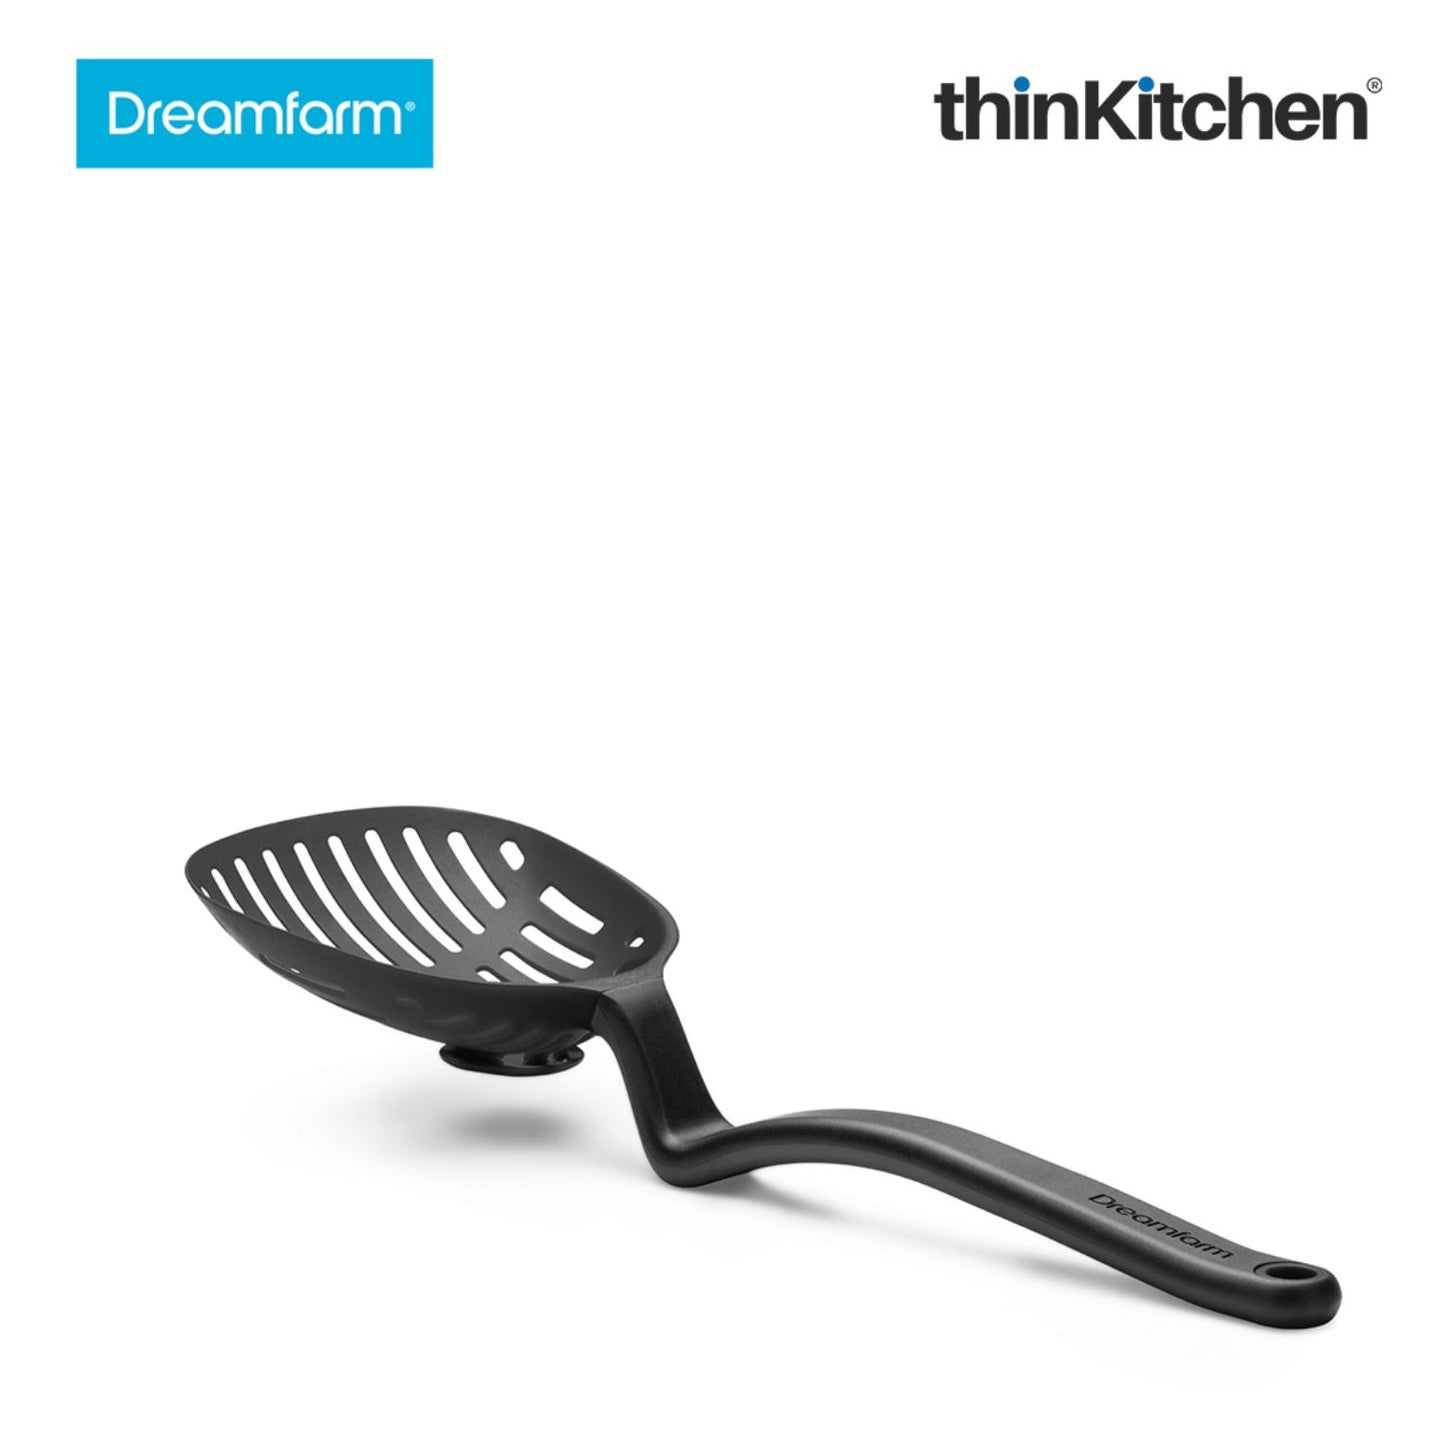 Dreamfarm Lestrain Drip Catching Sit Up Scoop Strainer Keeps Bench Tops Mess Free Flexible Dripless Slotted Spoon Food Strainer Black 1